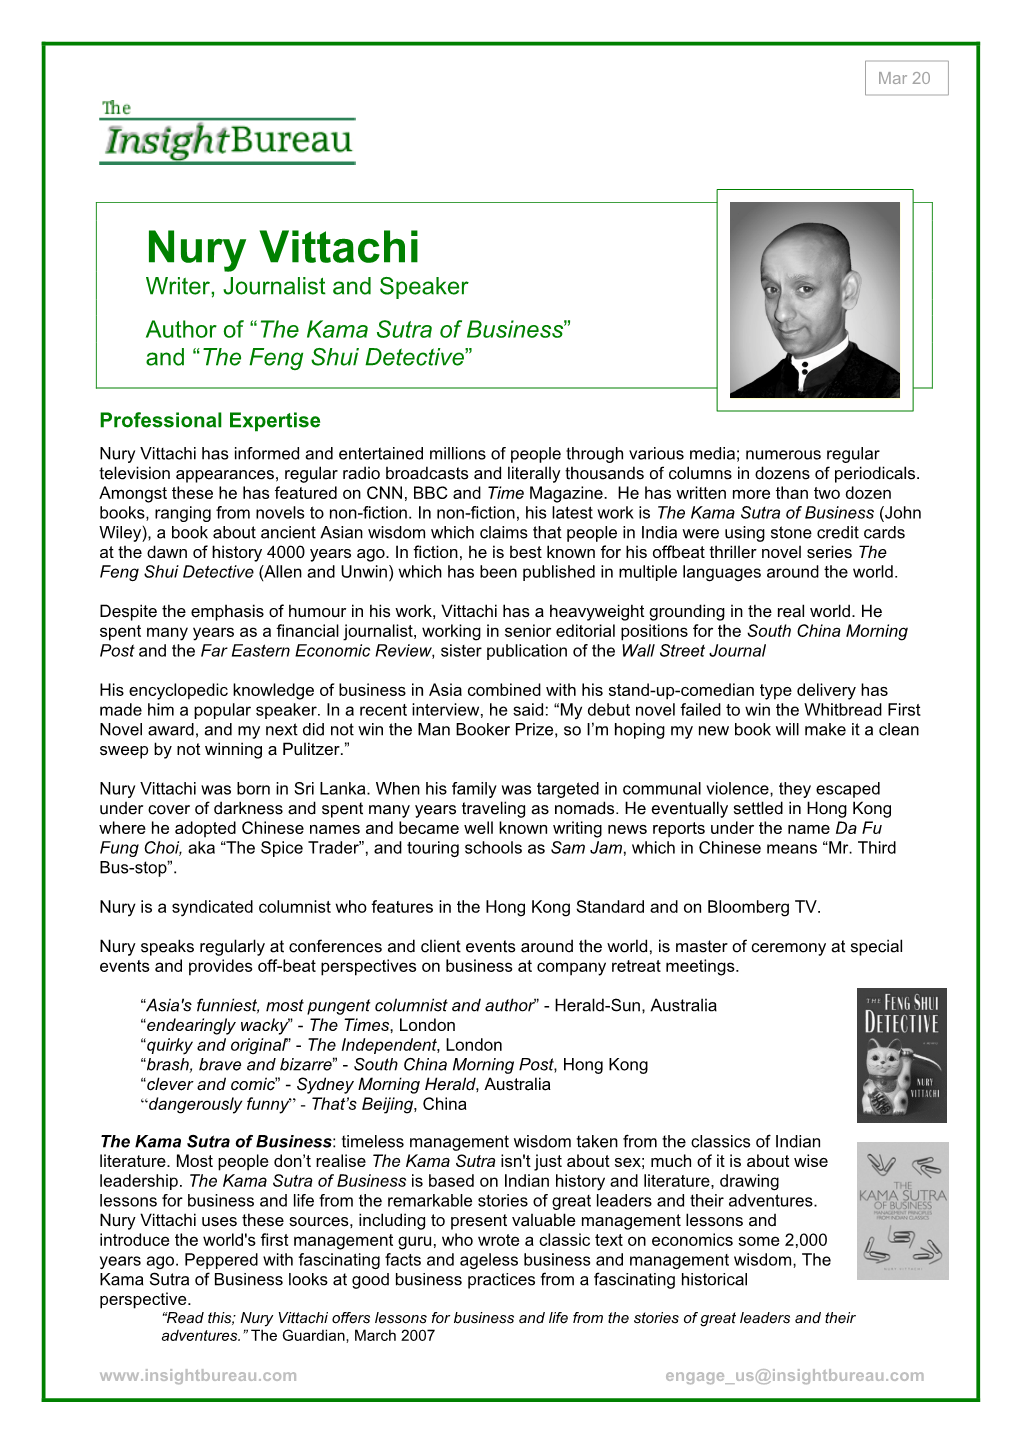 Nury Vittachi Writer, Journalist and Speaker Author of “The Kama Sutra of Business” and “The Feng Shui Detective”